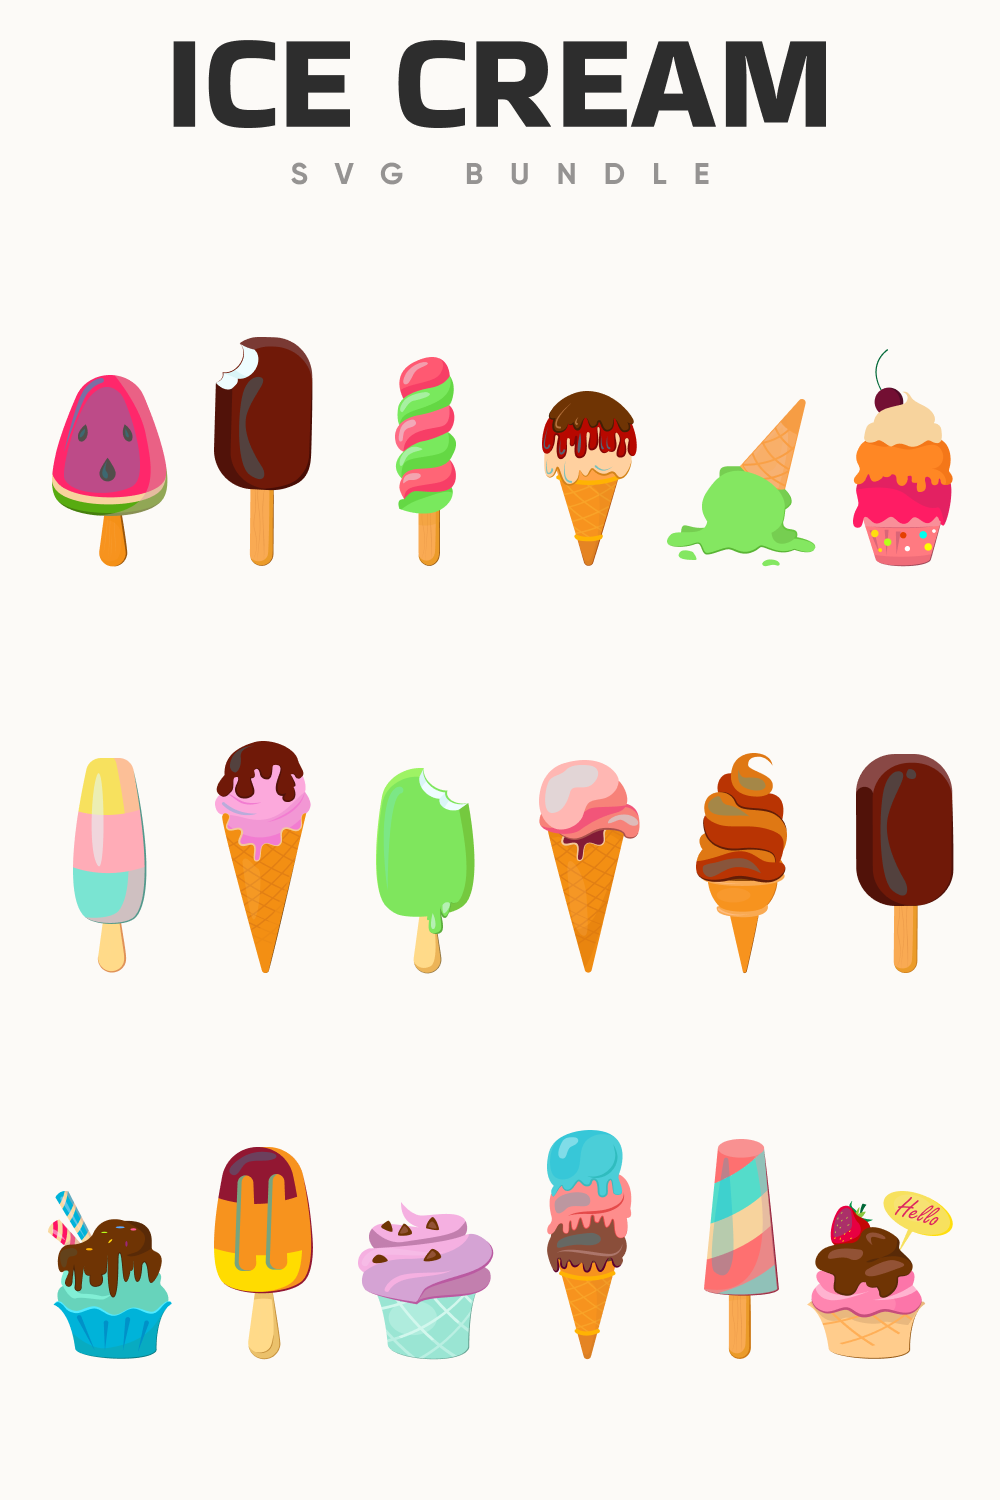 So many ice cream for the different flavors.